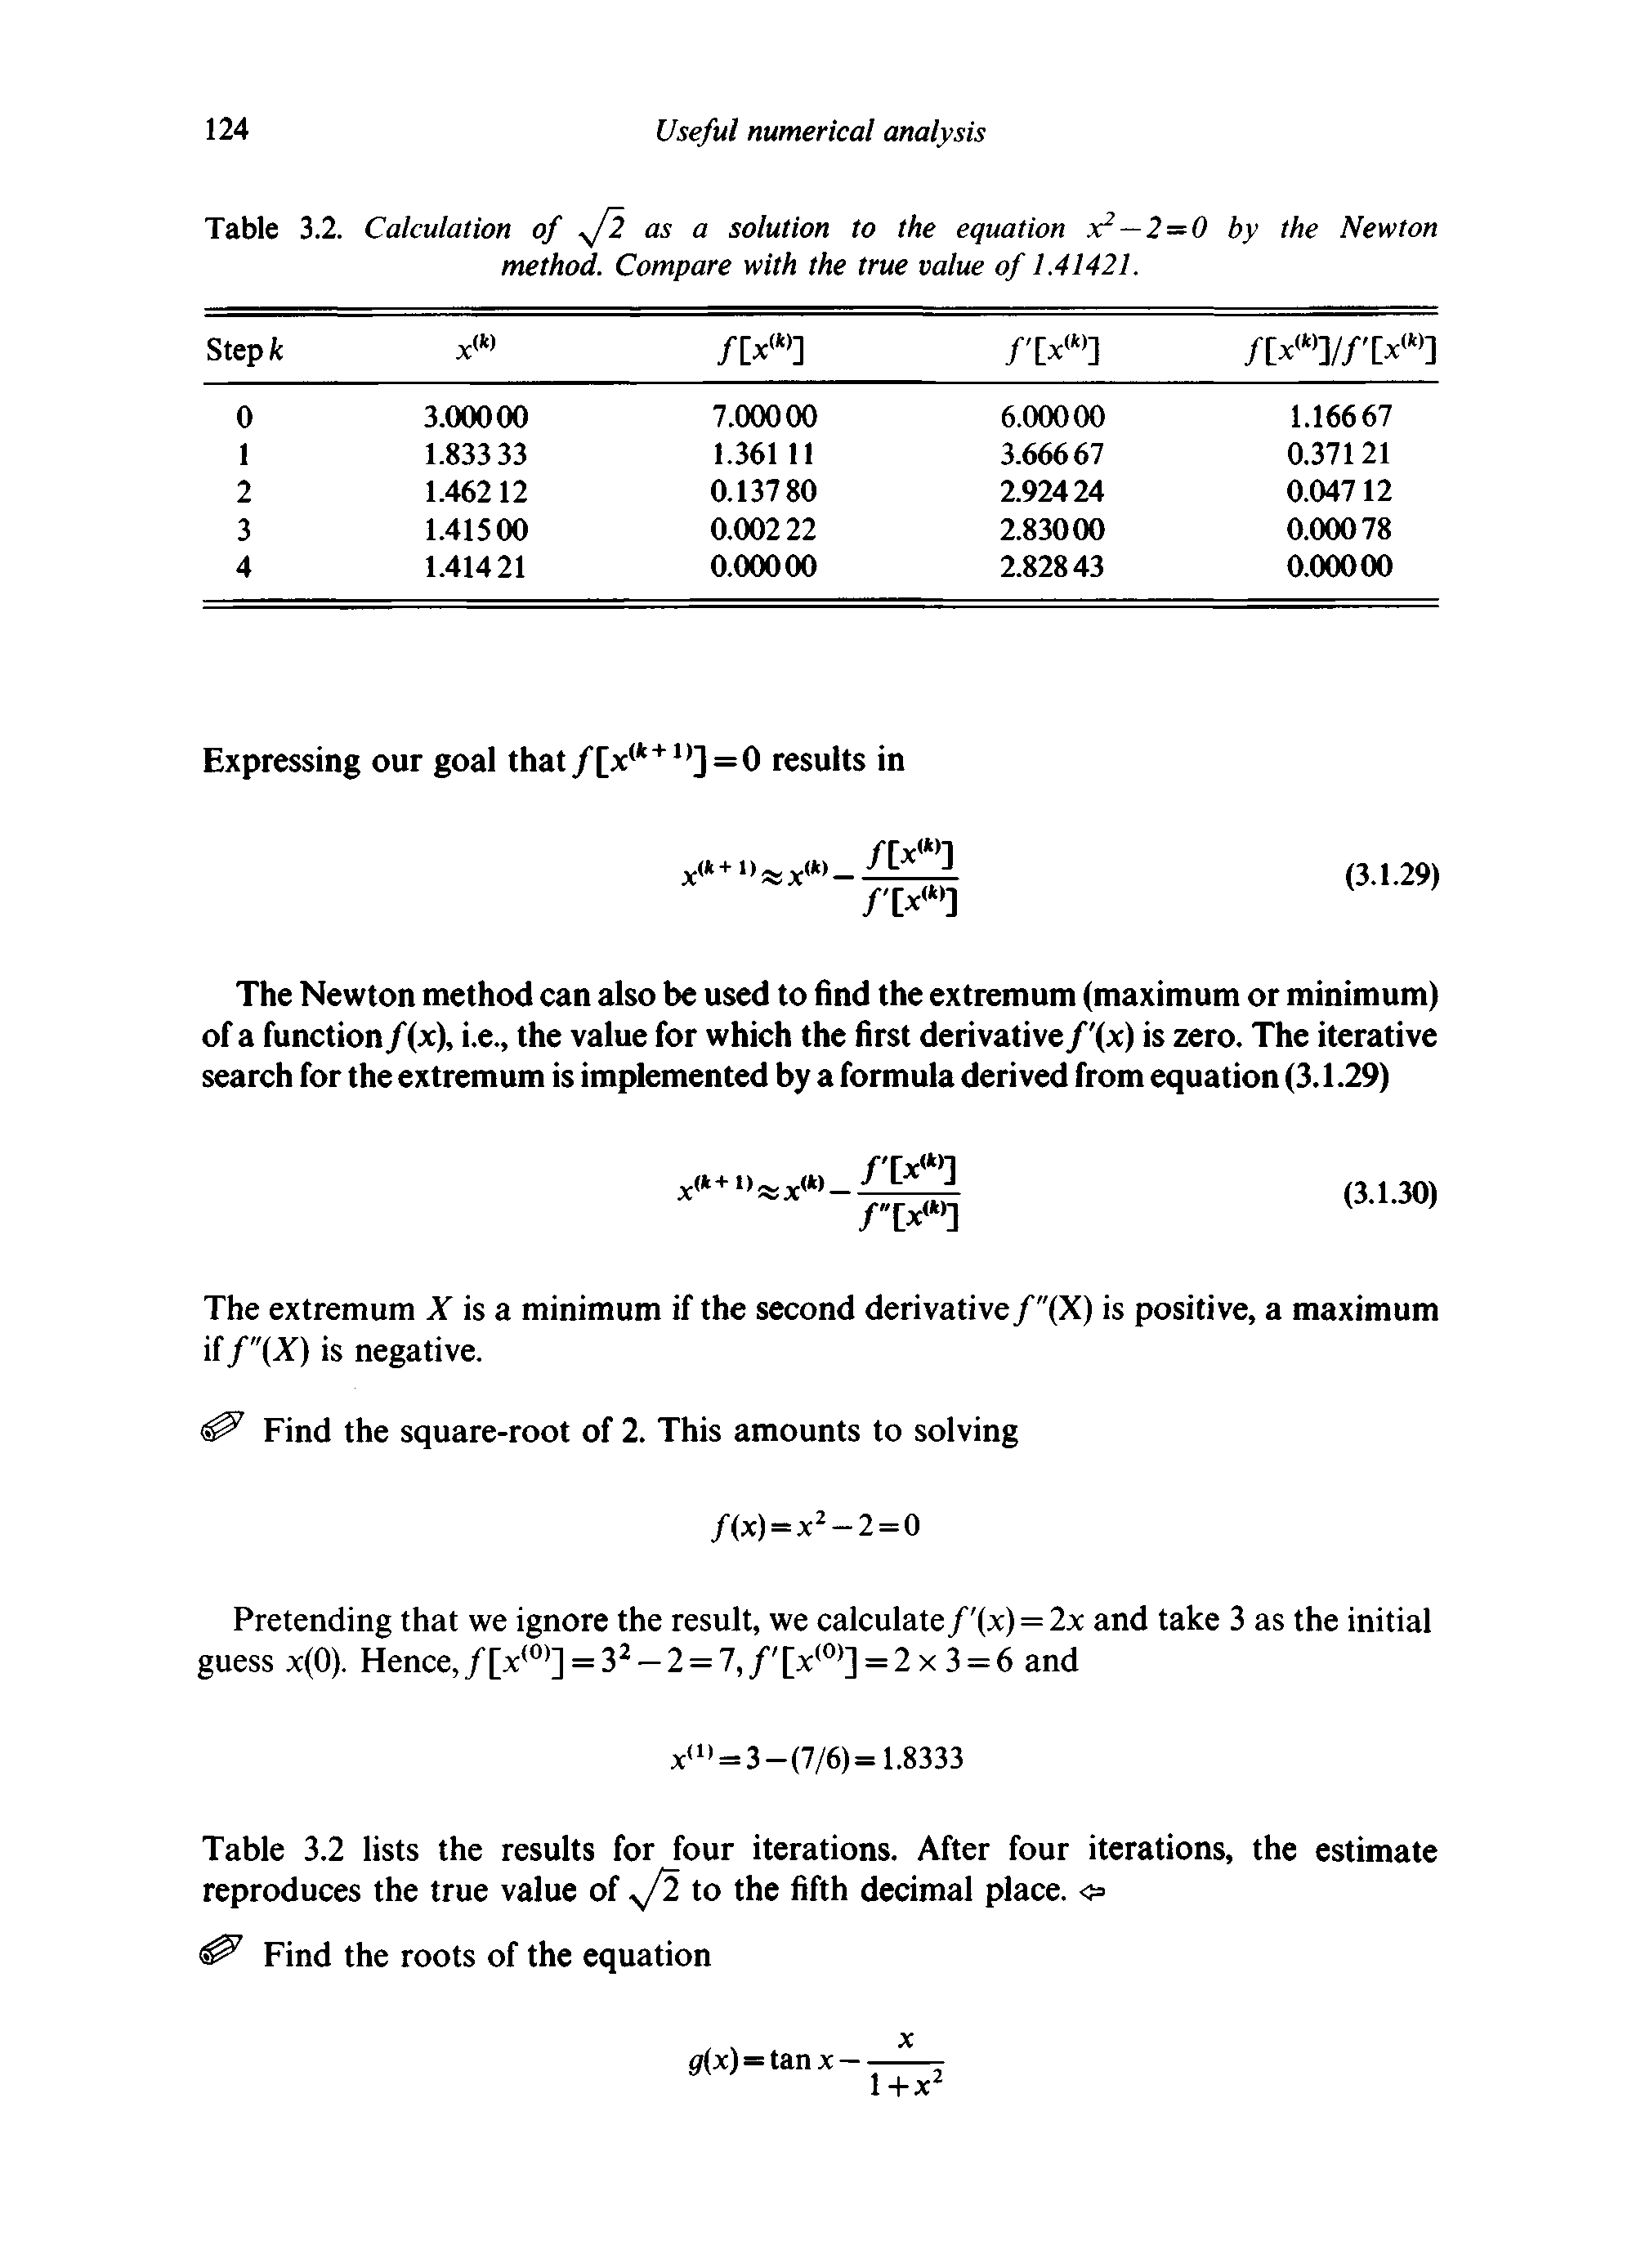 Table 3.2. Calculation of N/2 as a solution to the equation x2 — 2 = 0 by the Newton method. Compare with the true value of 1.41421.